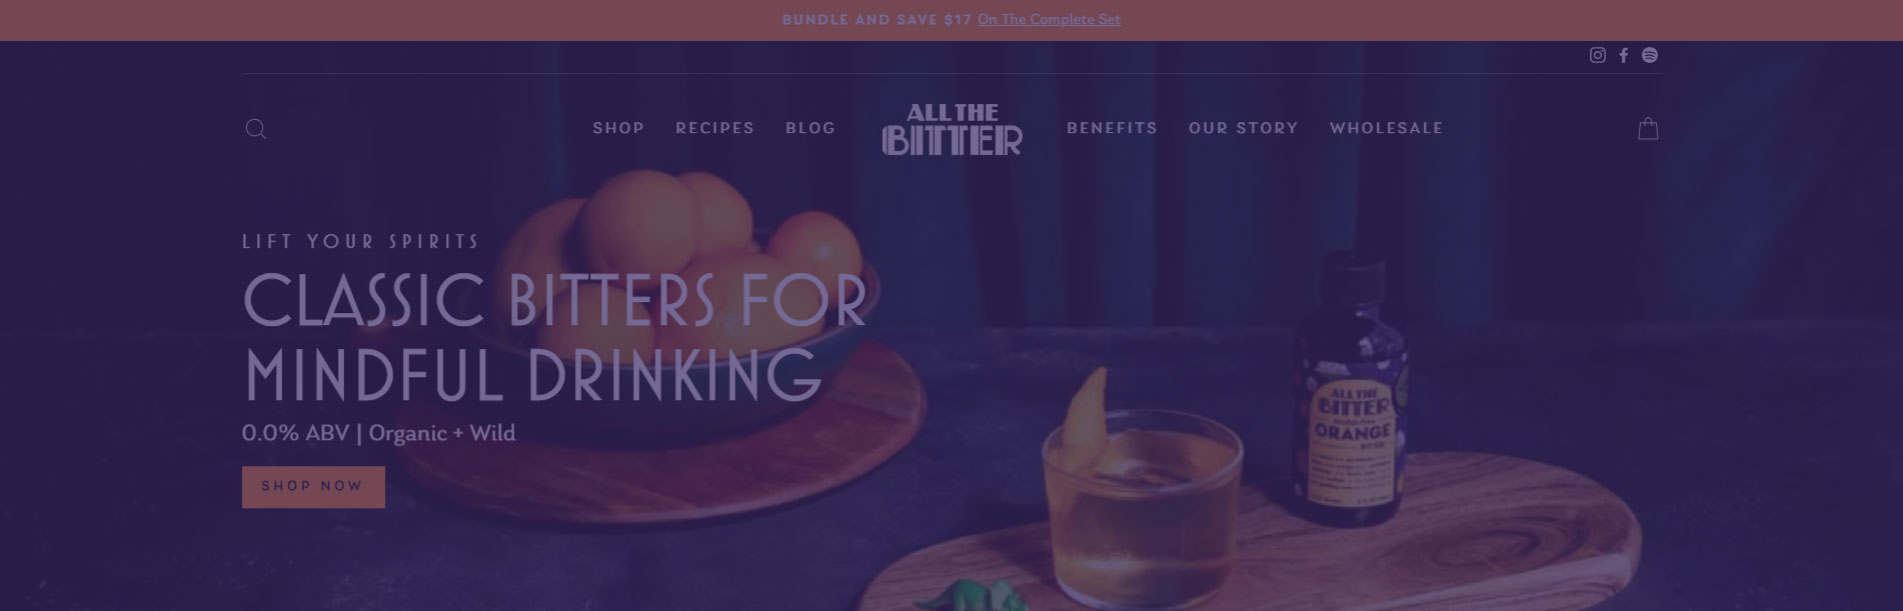 All The Bitter, a Consumer Goods industry, Email Marketing Service